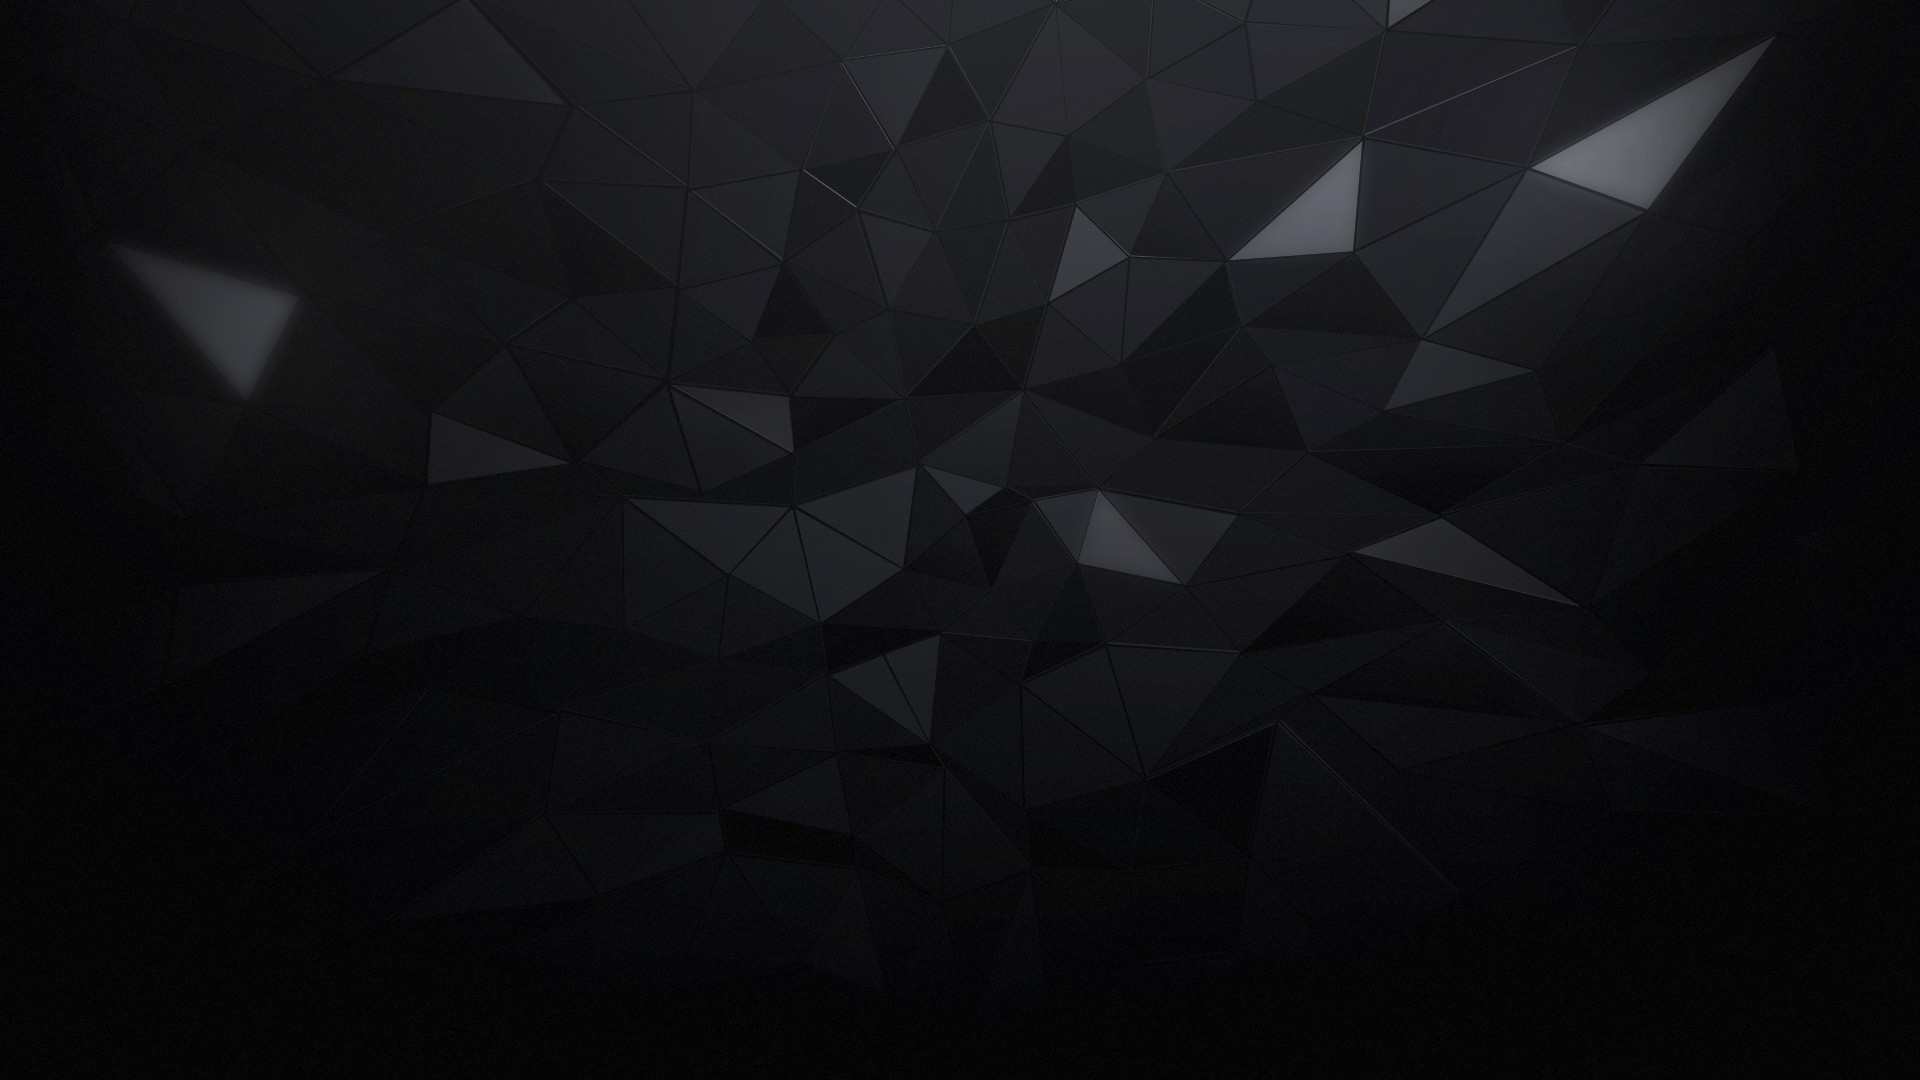 1920x1080 Black Triangle Wallpaper Unique Minimalism Triangle Black Abstract  Wallpapers Hd